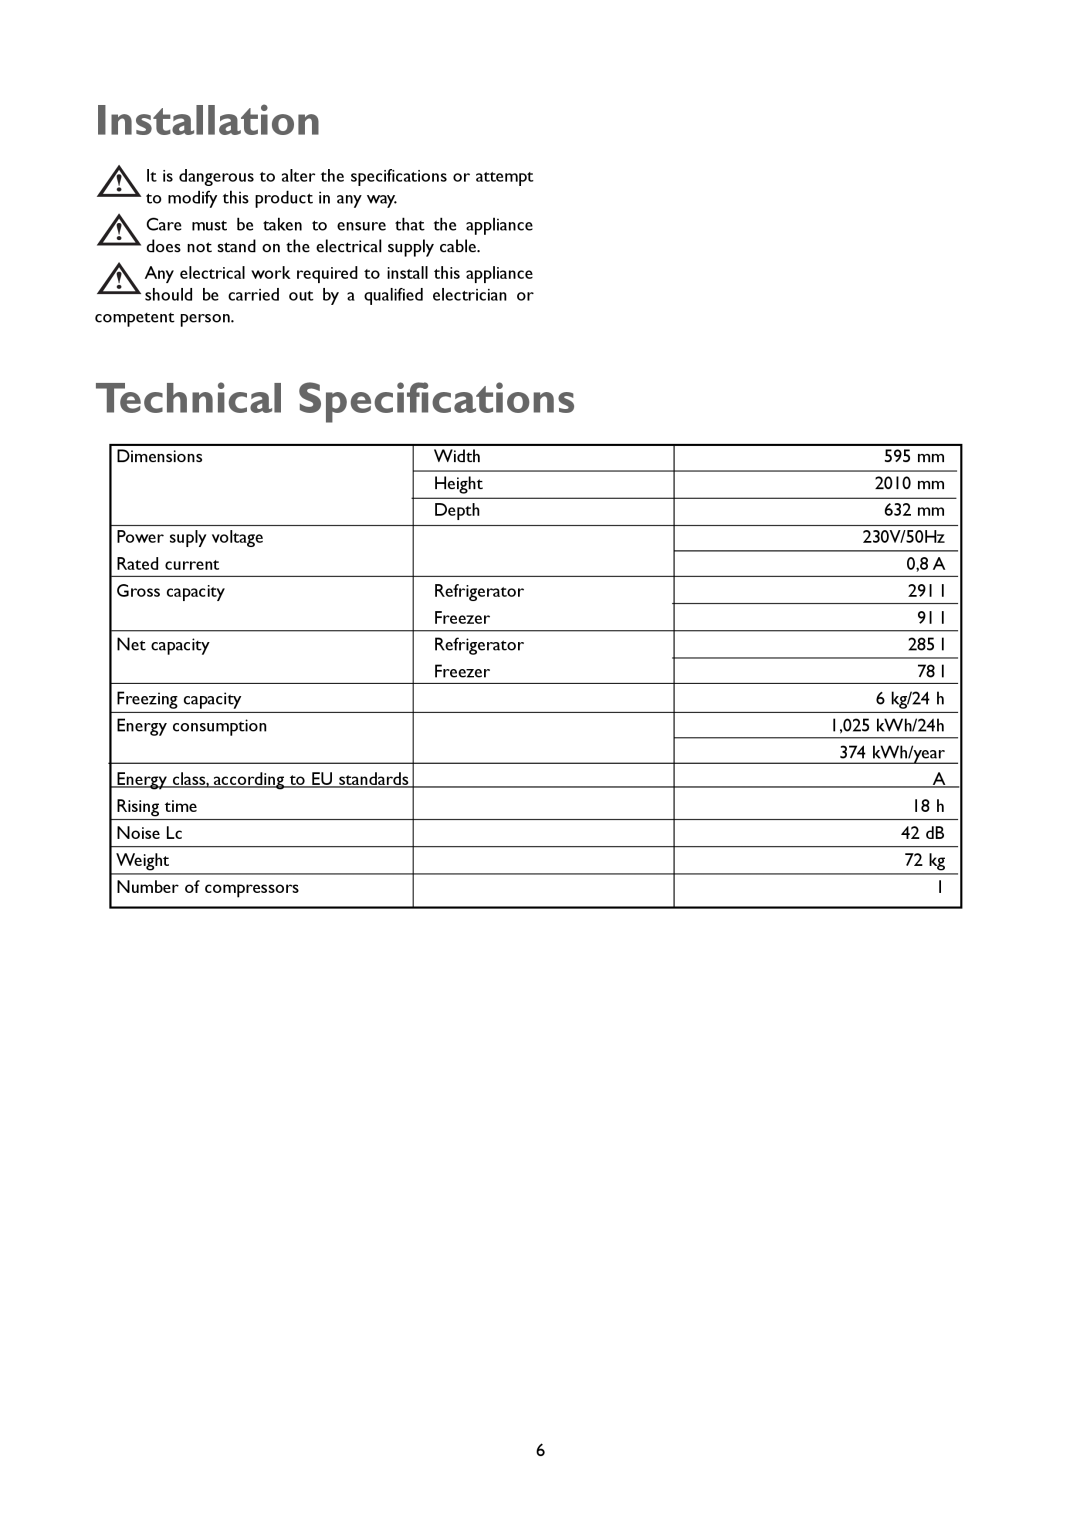 John Lewis JLFFW2004 instruction manual Installation, Technical Specifications 